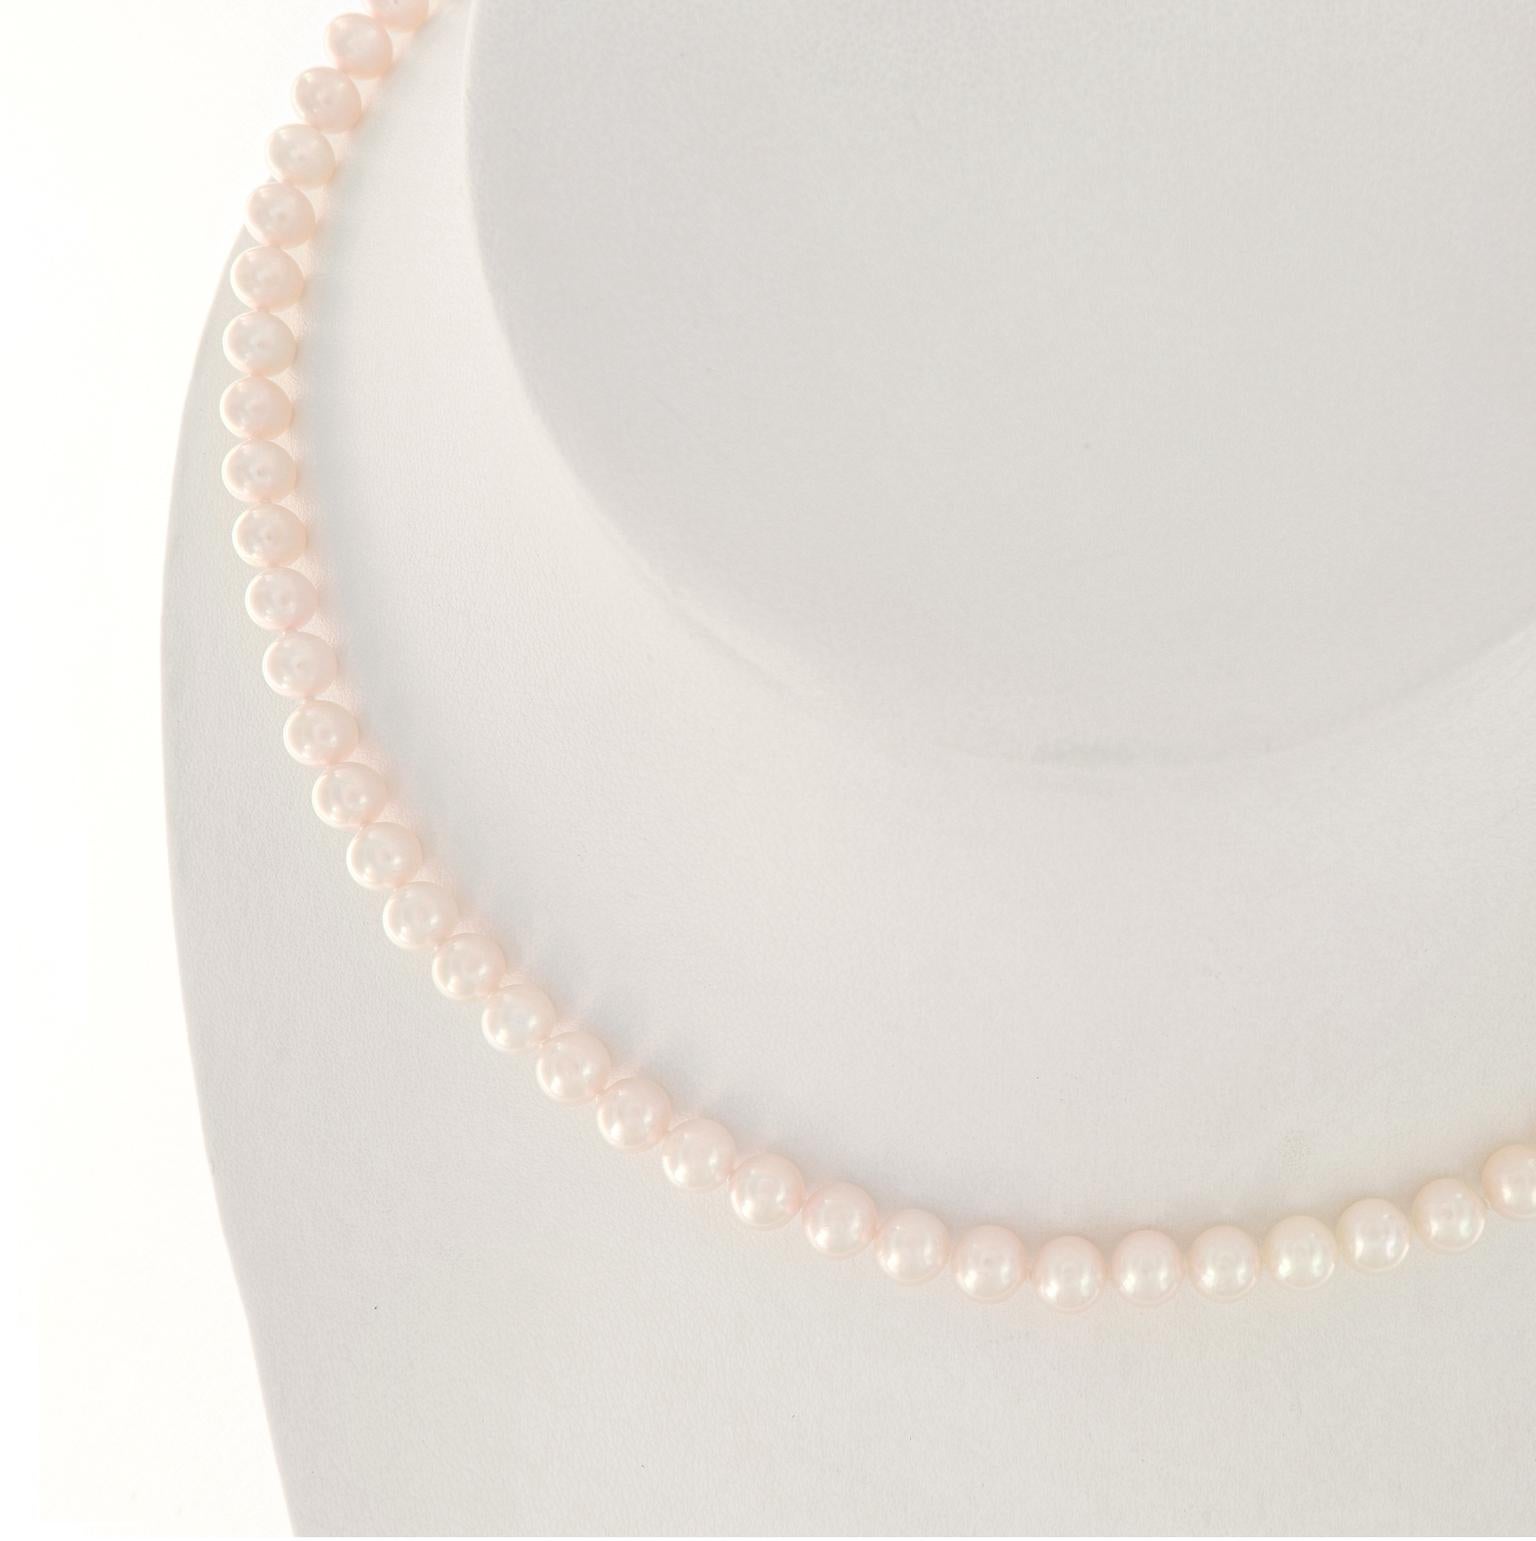 This pretty Mikimoto pearl necklace features 5.5-6.0 mm Akoya pearls and is 18 inches long. The clasp is 18k yellow gold and is set with a pearl at its center. This estate piece is in excellent condition. Weighs 21.8 grams.